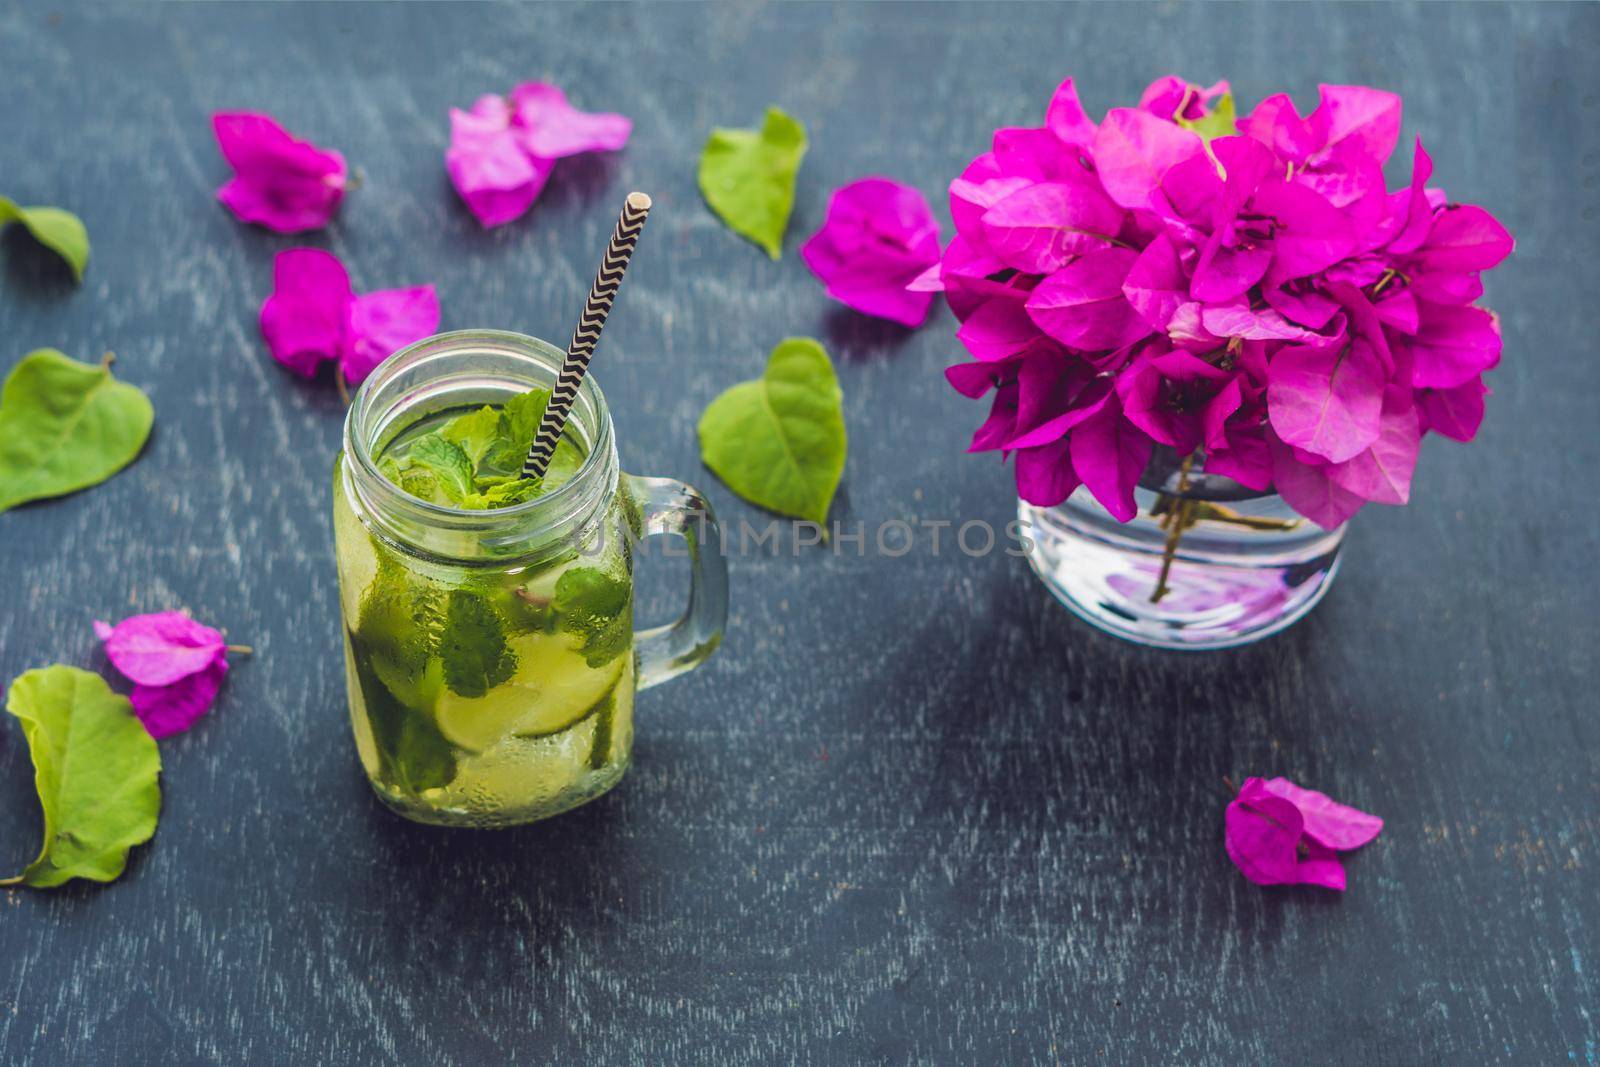 Spring purple flowers and spring mojito drink on an old wooden background.